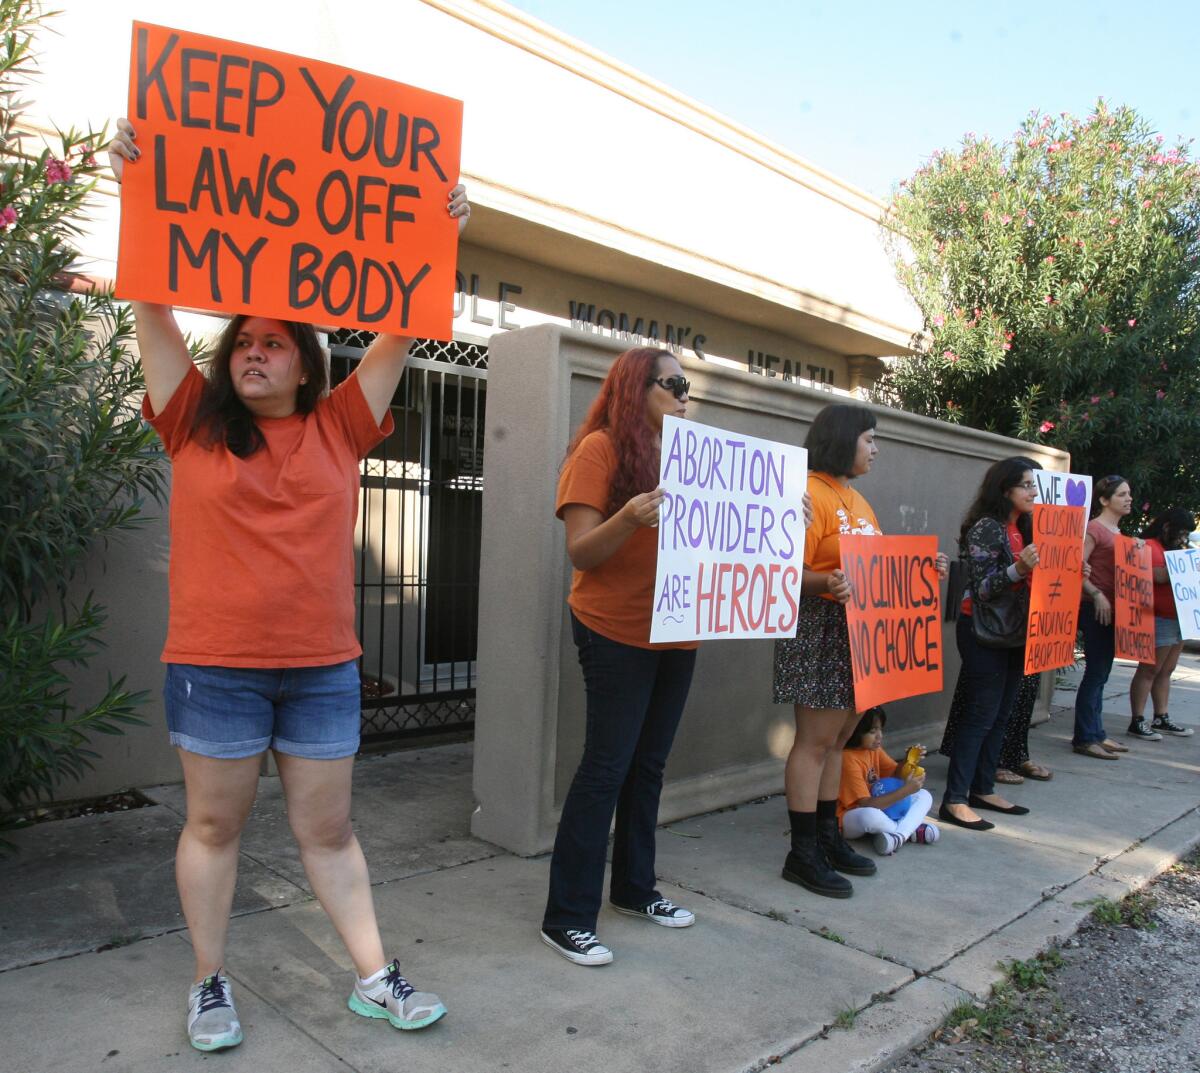 Pro-choice protesters in McAllen, Texas in October 2014.